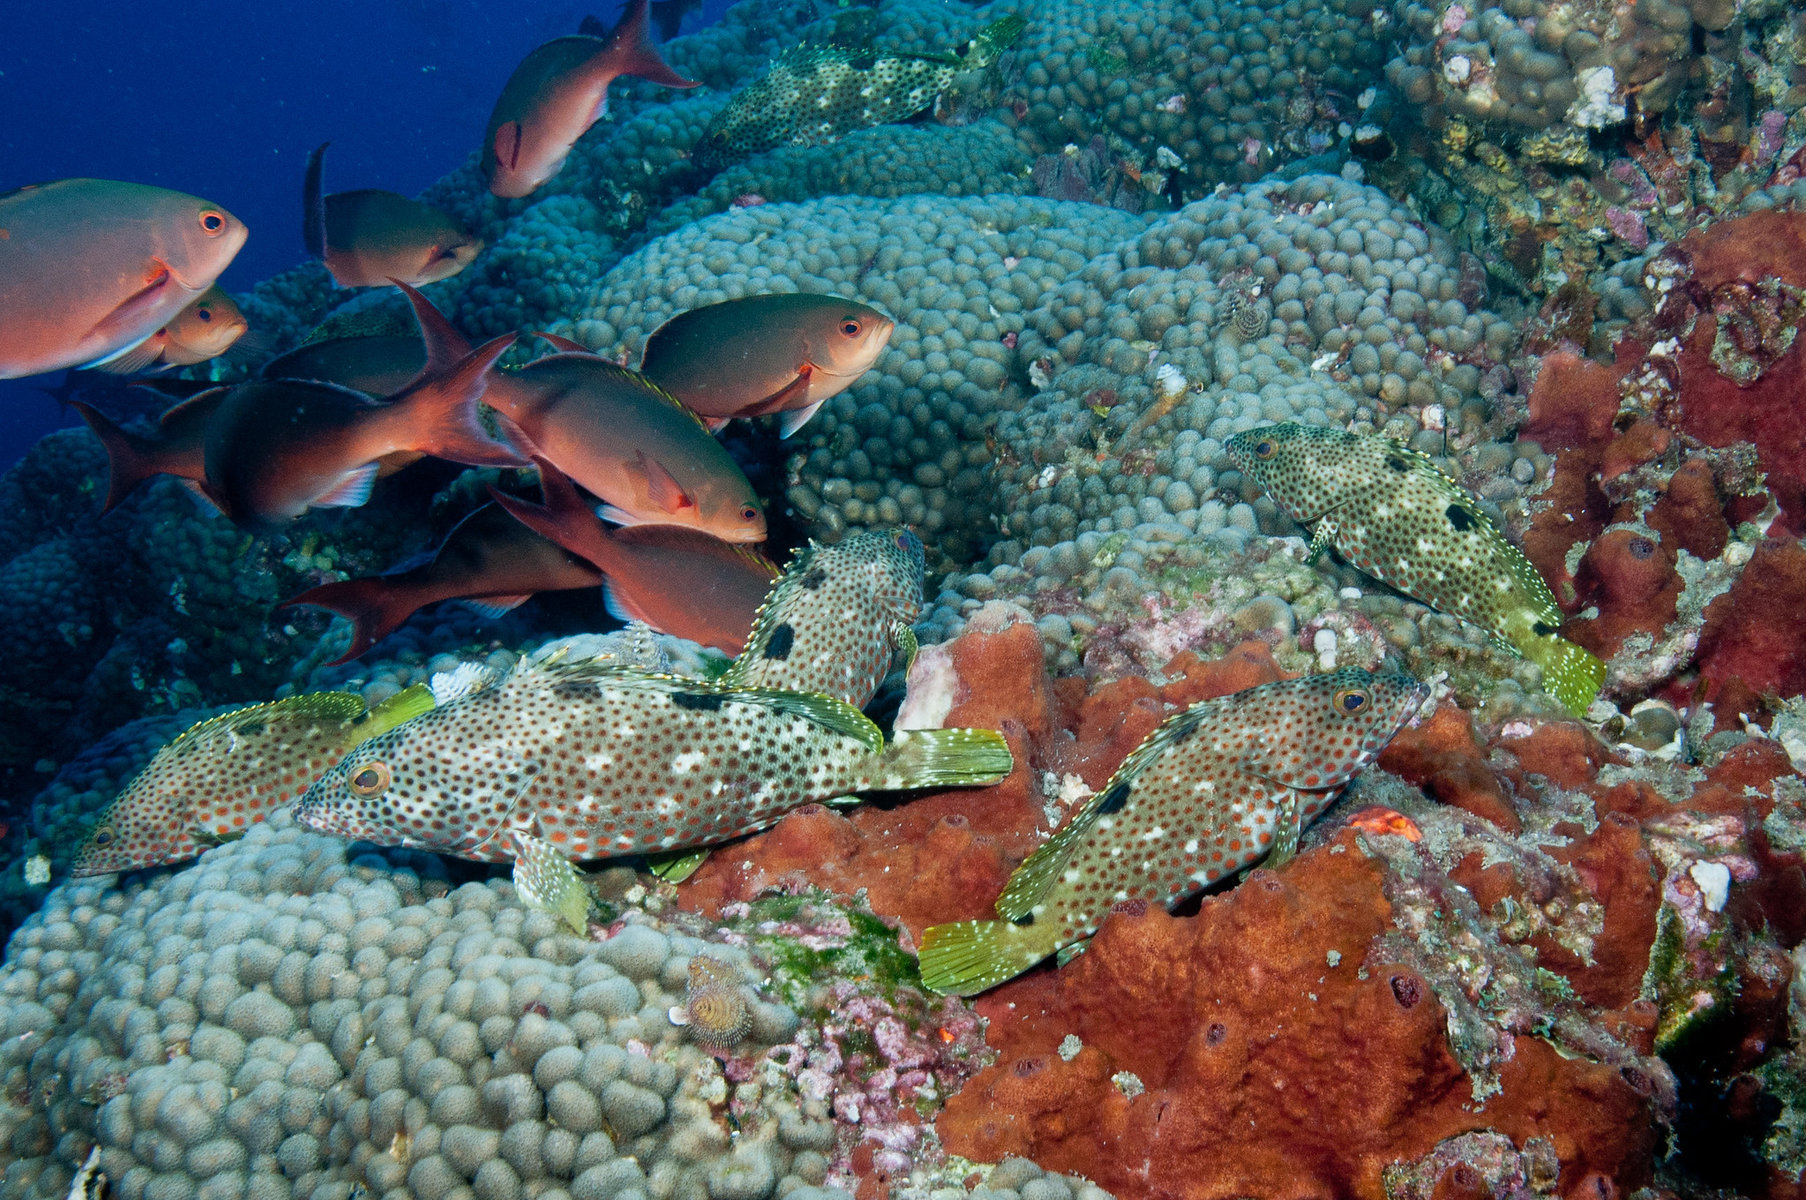 Schools of rockhind and creolefish rest along the reef in Flower Garden Banks National Marine Sanctuary in the Gulf of Mexico.